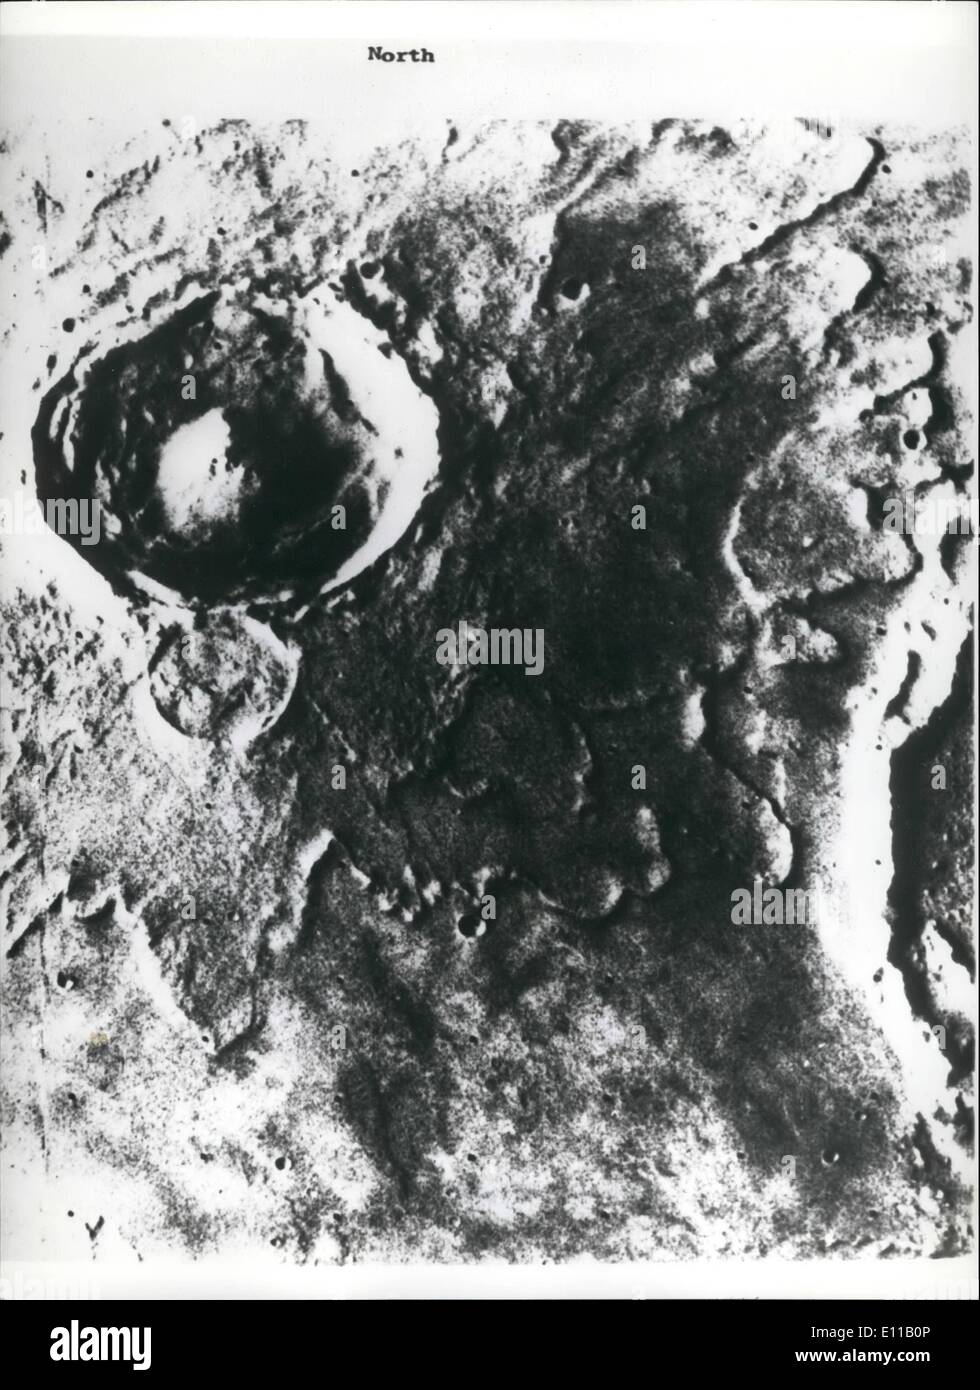 Jul. 07, 1976 - A close up view of Mars made by the Viking 1 spacecraft; Photo Shows A close up of Mars made by the Viking 1 spececraft as it passes in orbit over the Martians surface, Space officials have ascertained that this is the crater Yuty, located near the spacecraft potential landing site. This range of craters is 1165 miles and Yuty crater was probably formed by a massive meteorite. Wind and erosion and possible water erosion helps to accentaste the surface details. Stock Photo